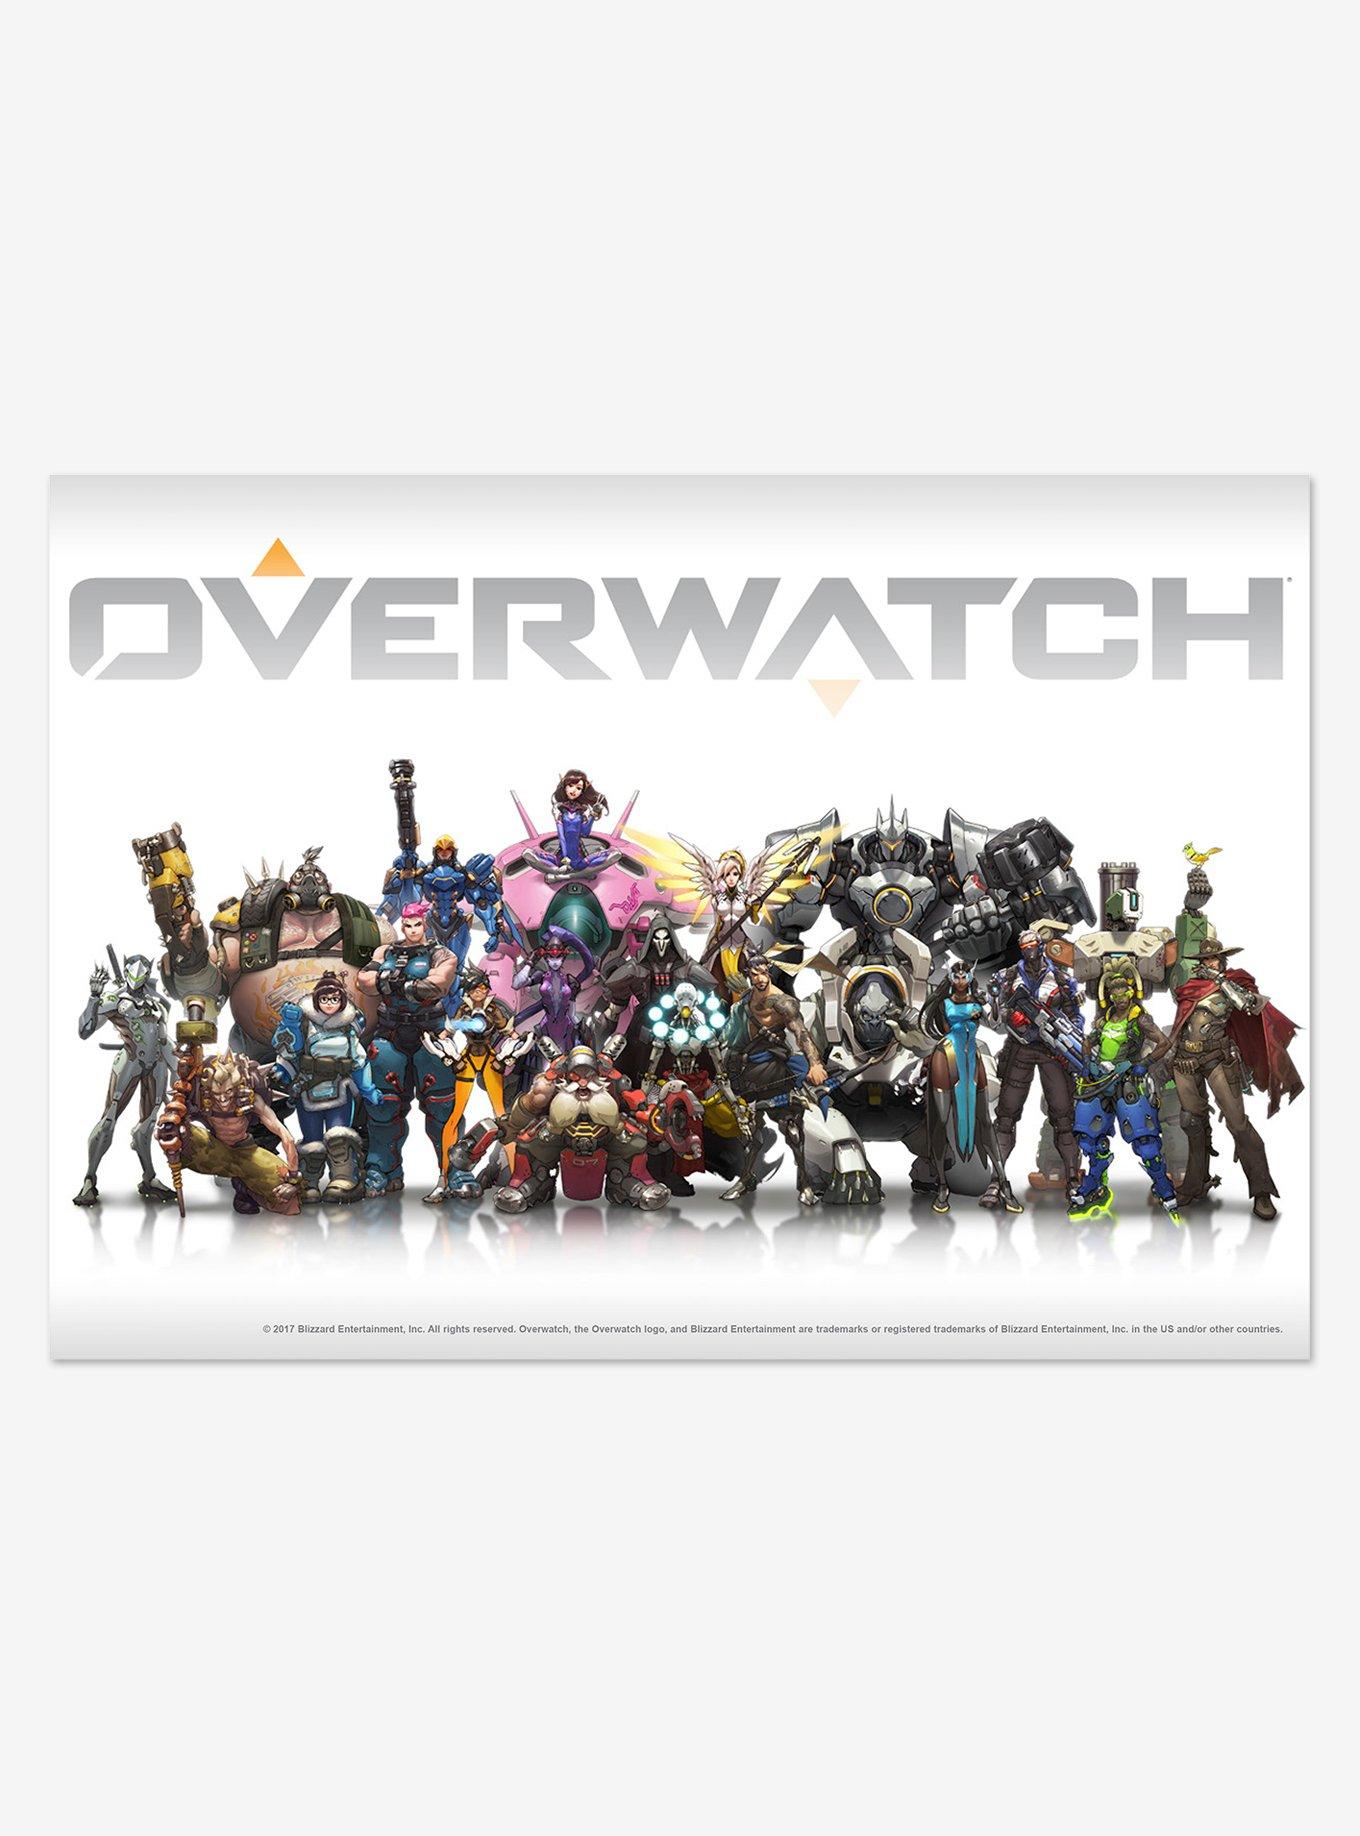 Overwatch Group Wood Wall Art, , hi-res